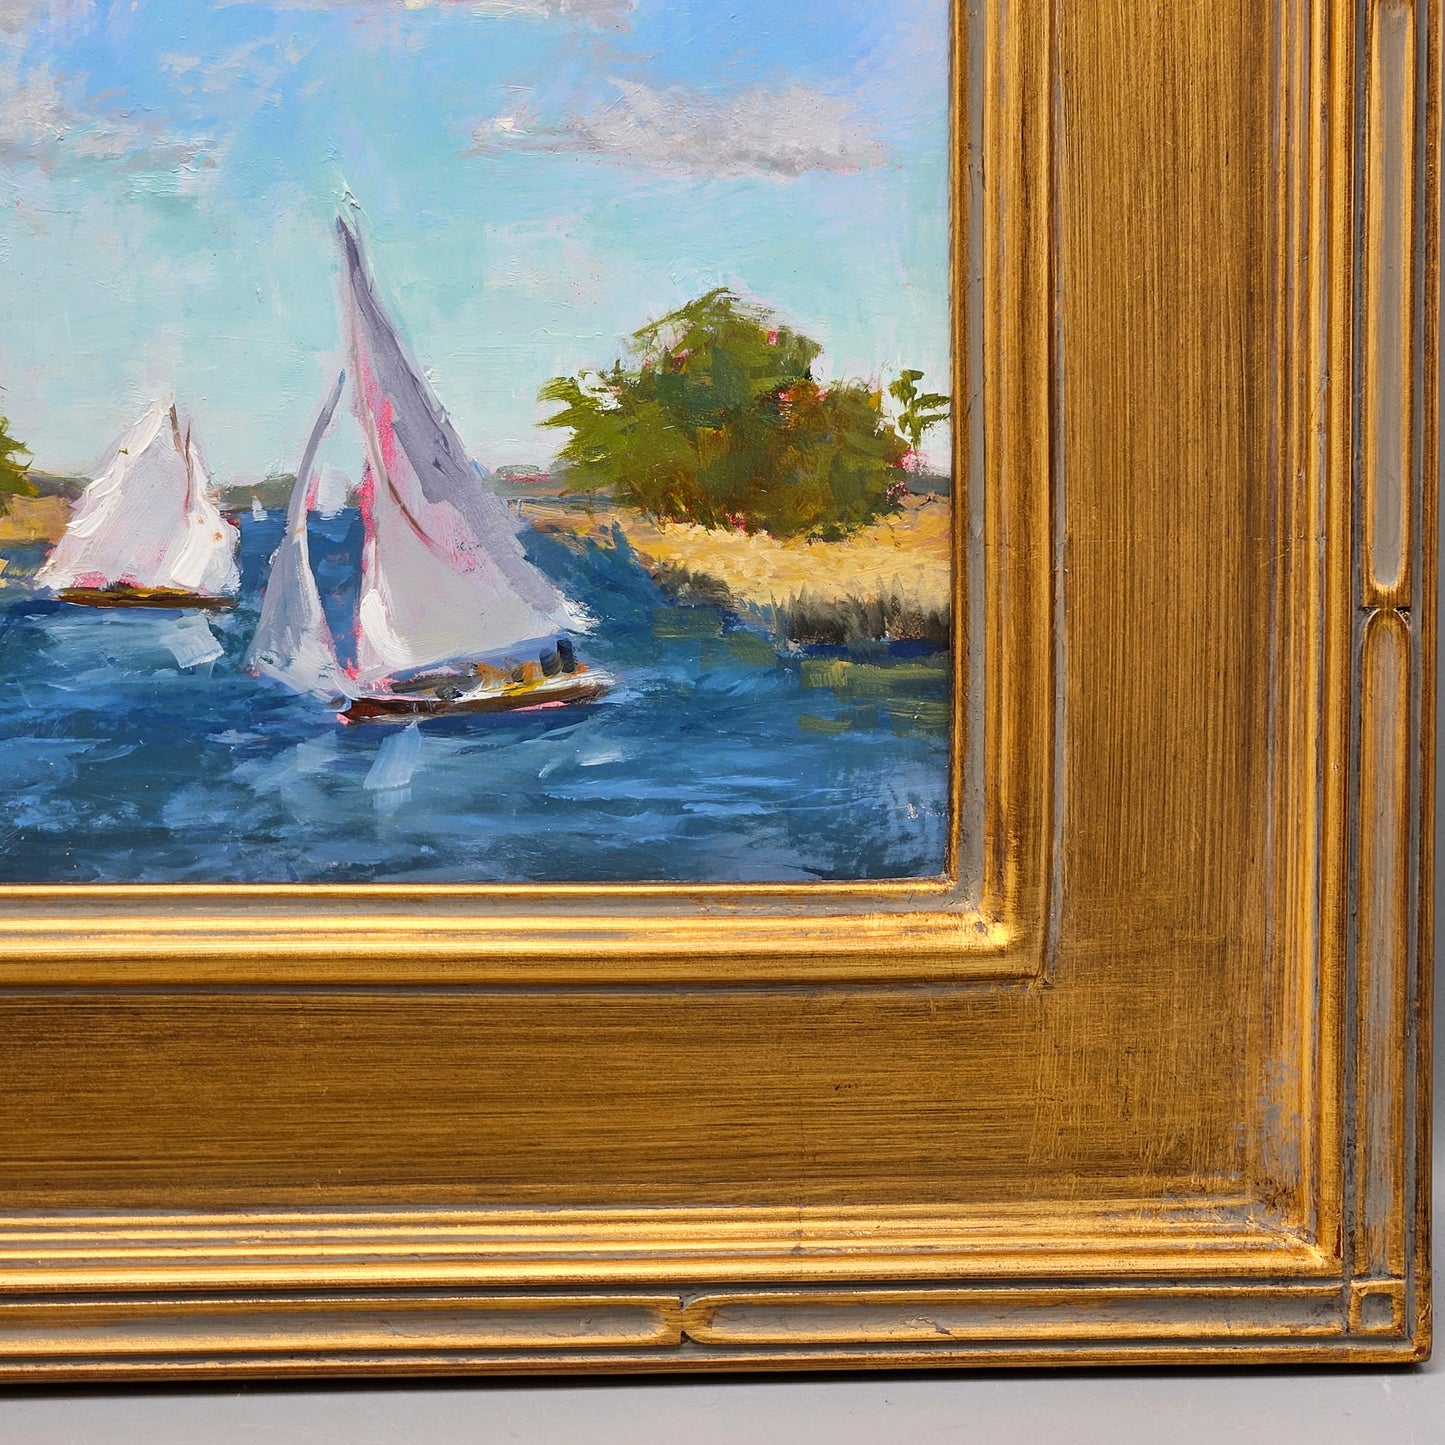 Decorative Oil Painting on Board of Sailboat Scene in Gold Frame